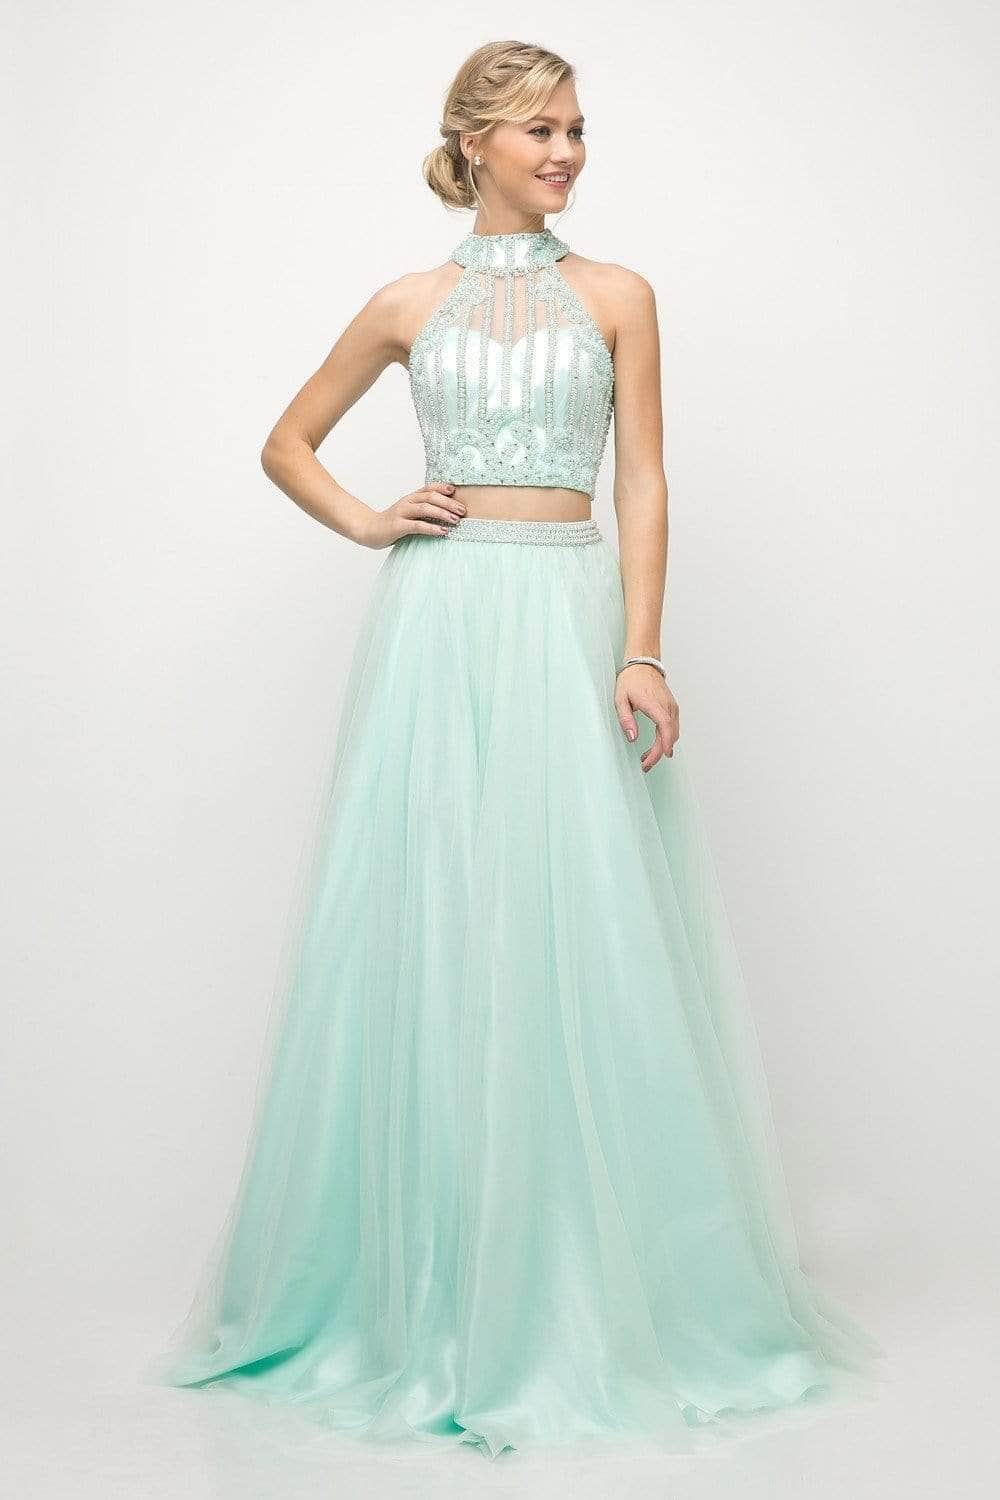 Ladivine 8994 - Illusion High Halter Beaded A-Line Gown
